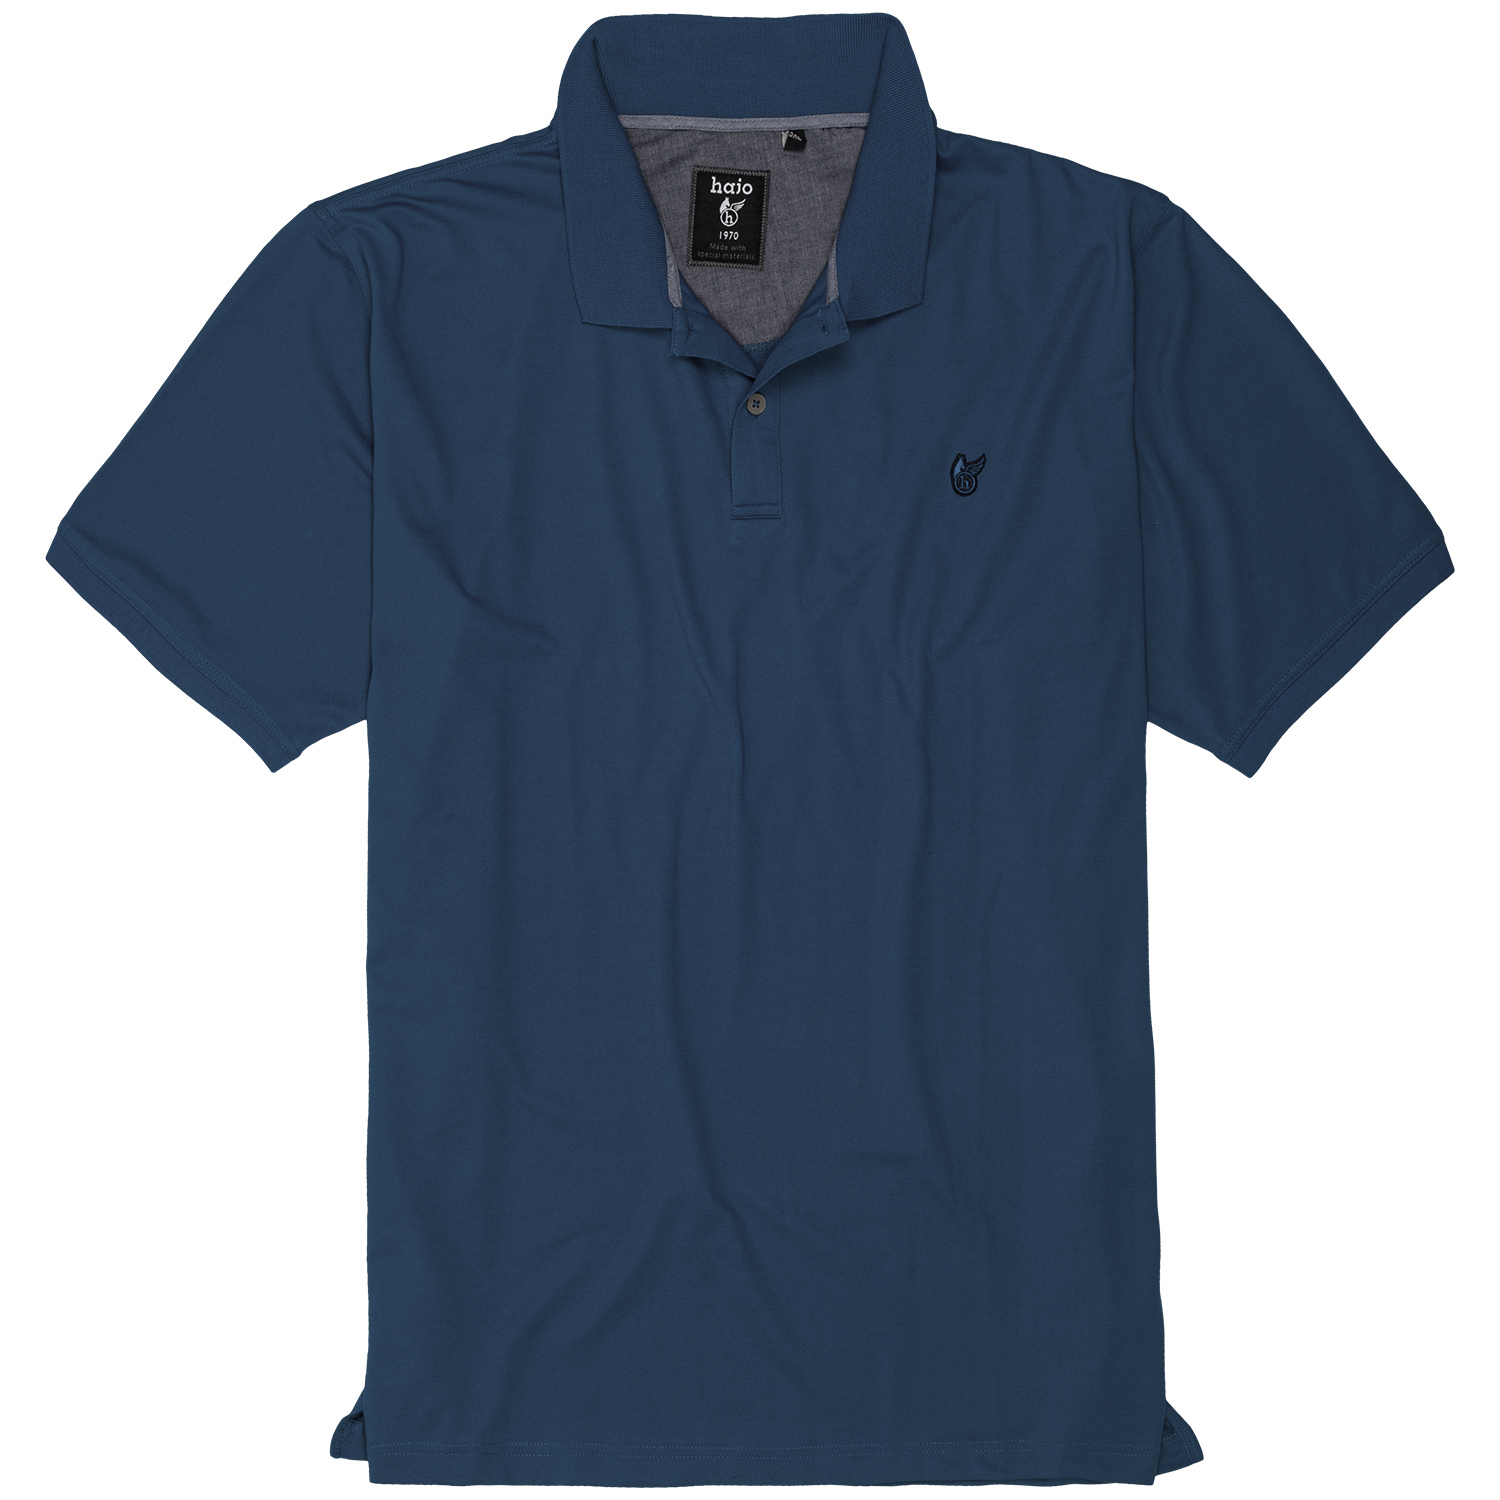 Polo shirt "stay fresh" by hajo up to oversize 6XL - admiral blue